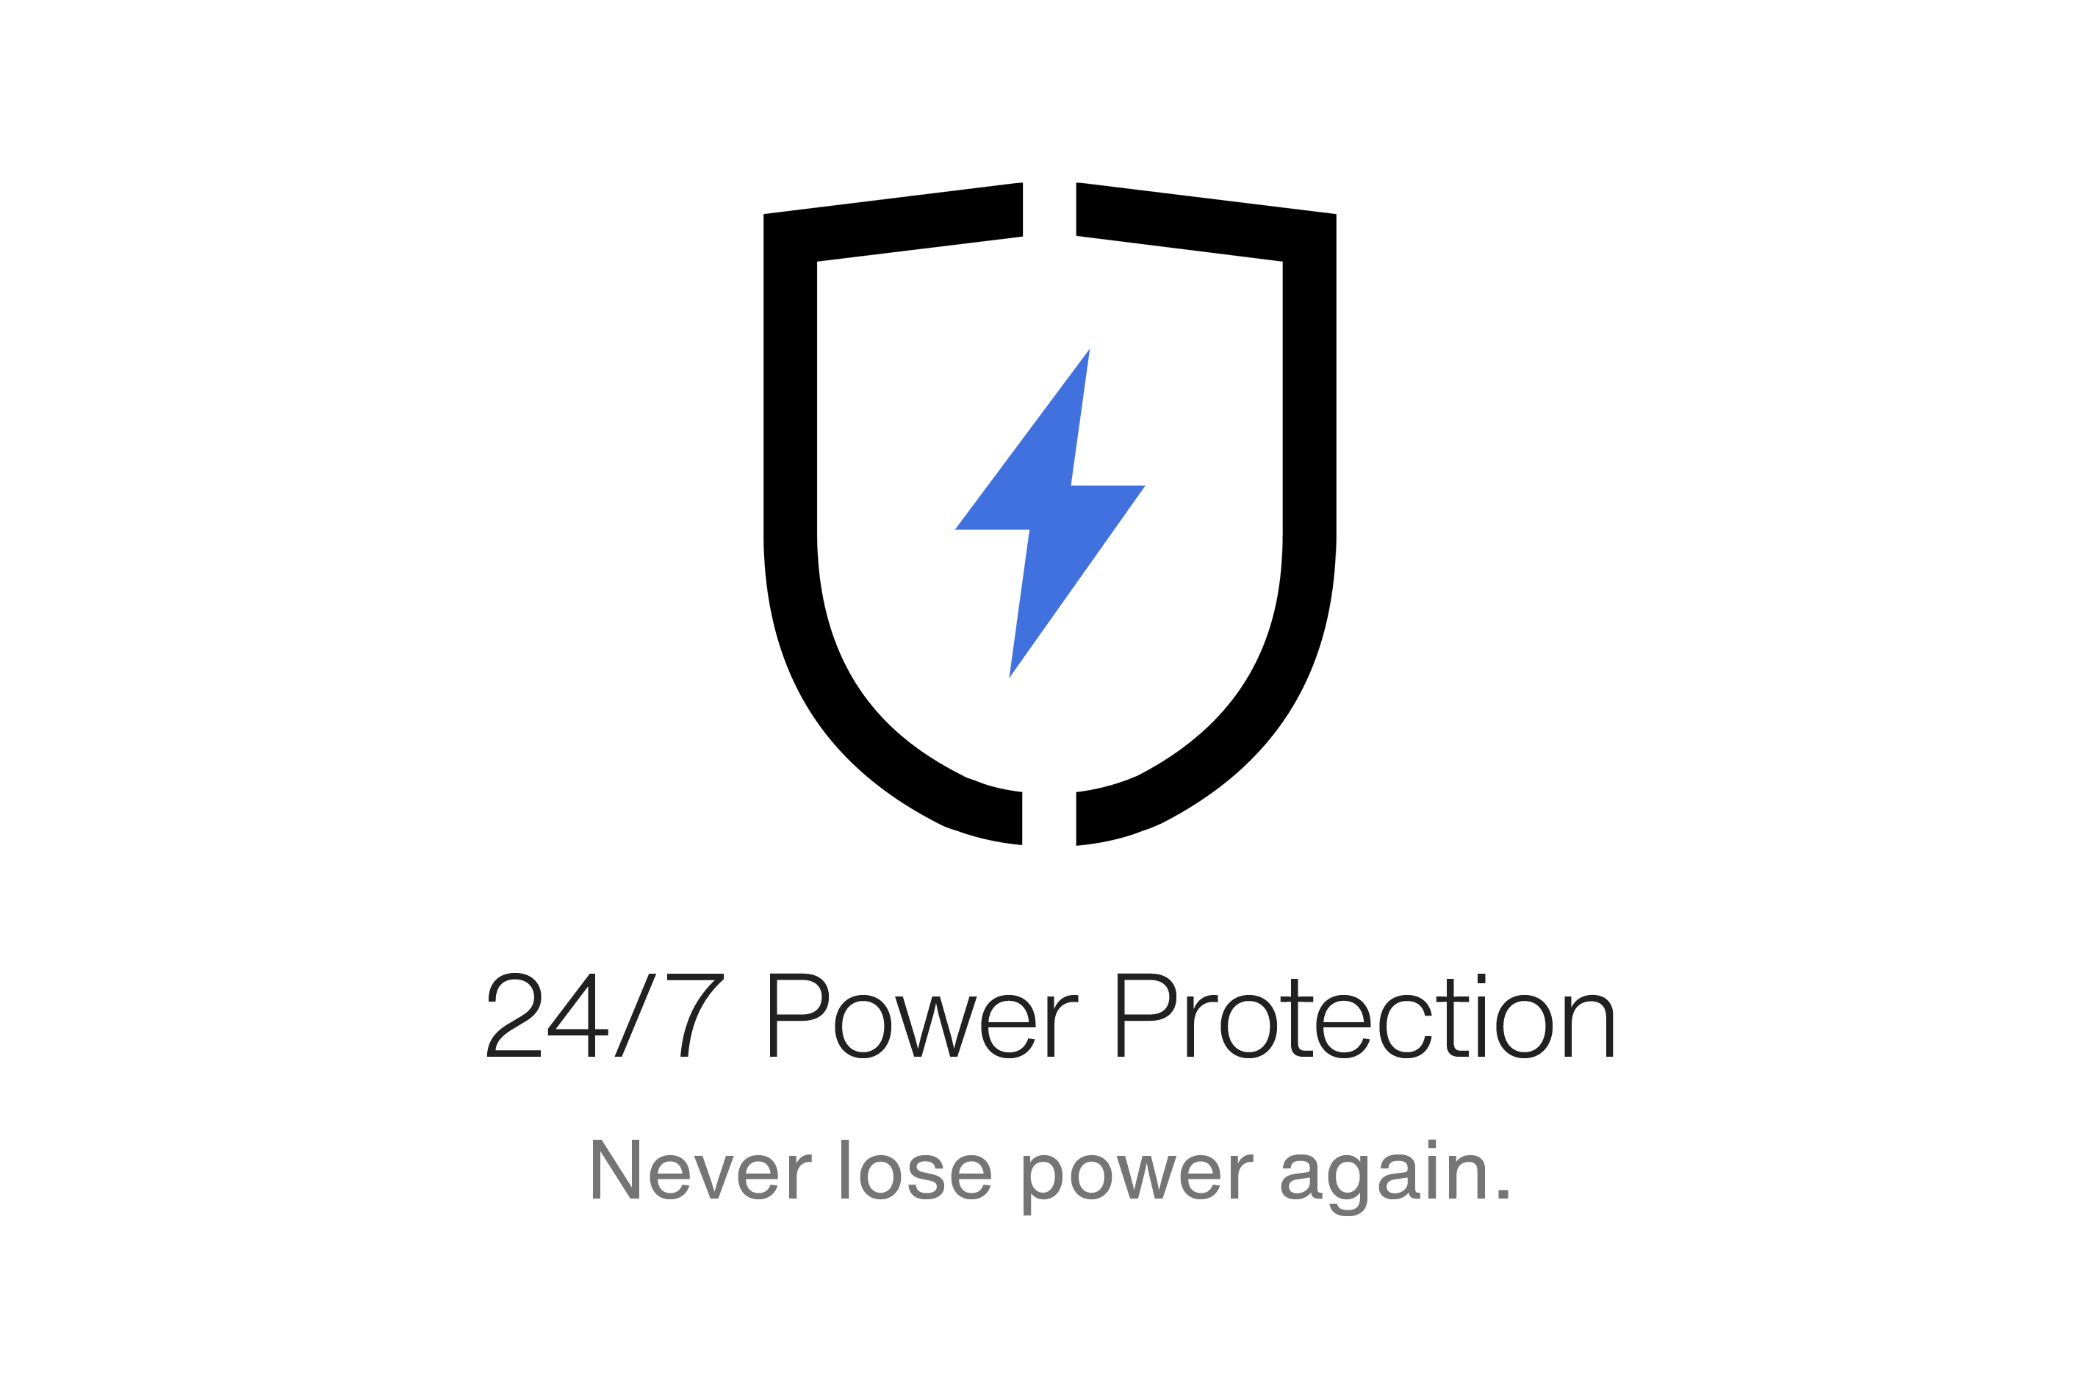 Black and blue graphic to represent 24/7 power.
DAM # aae41041
Icon